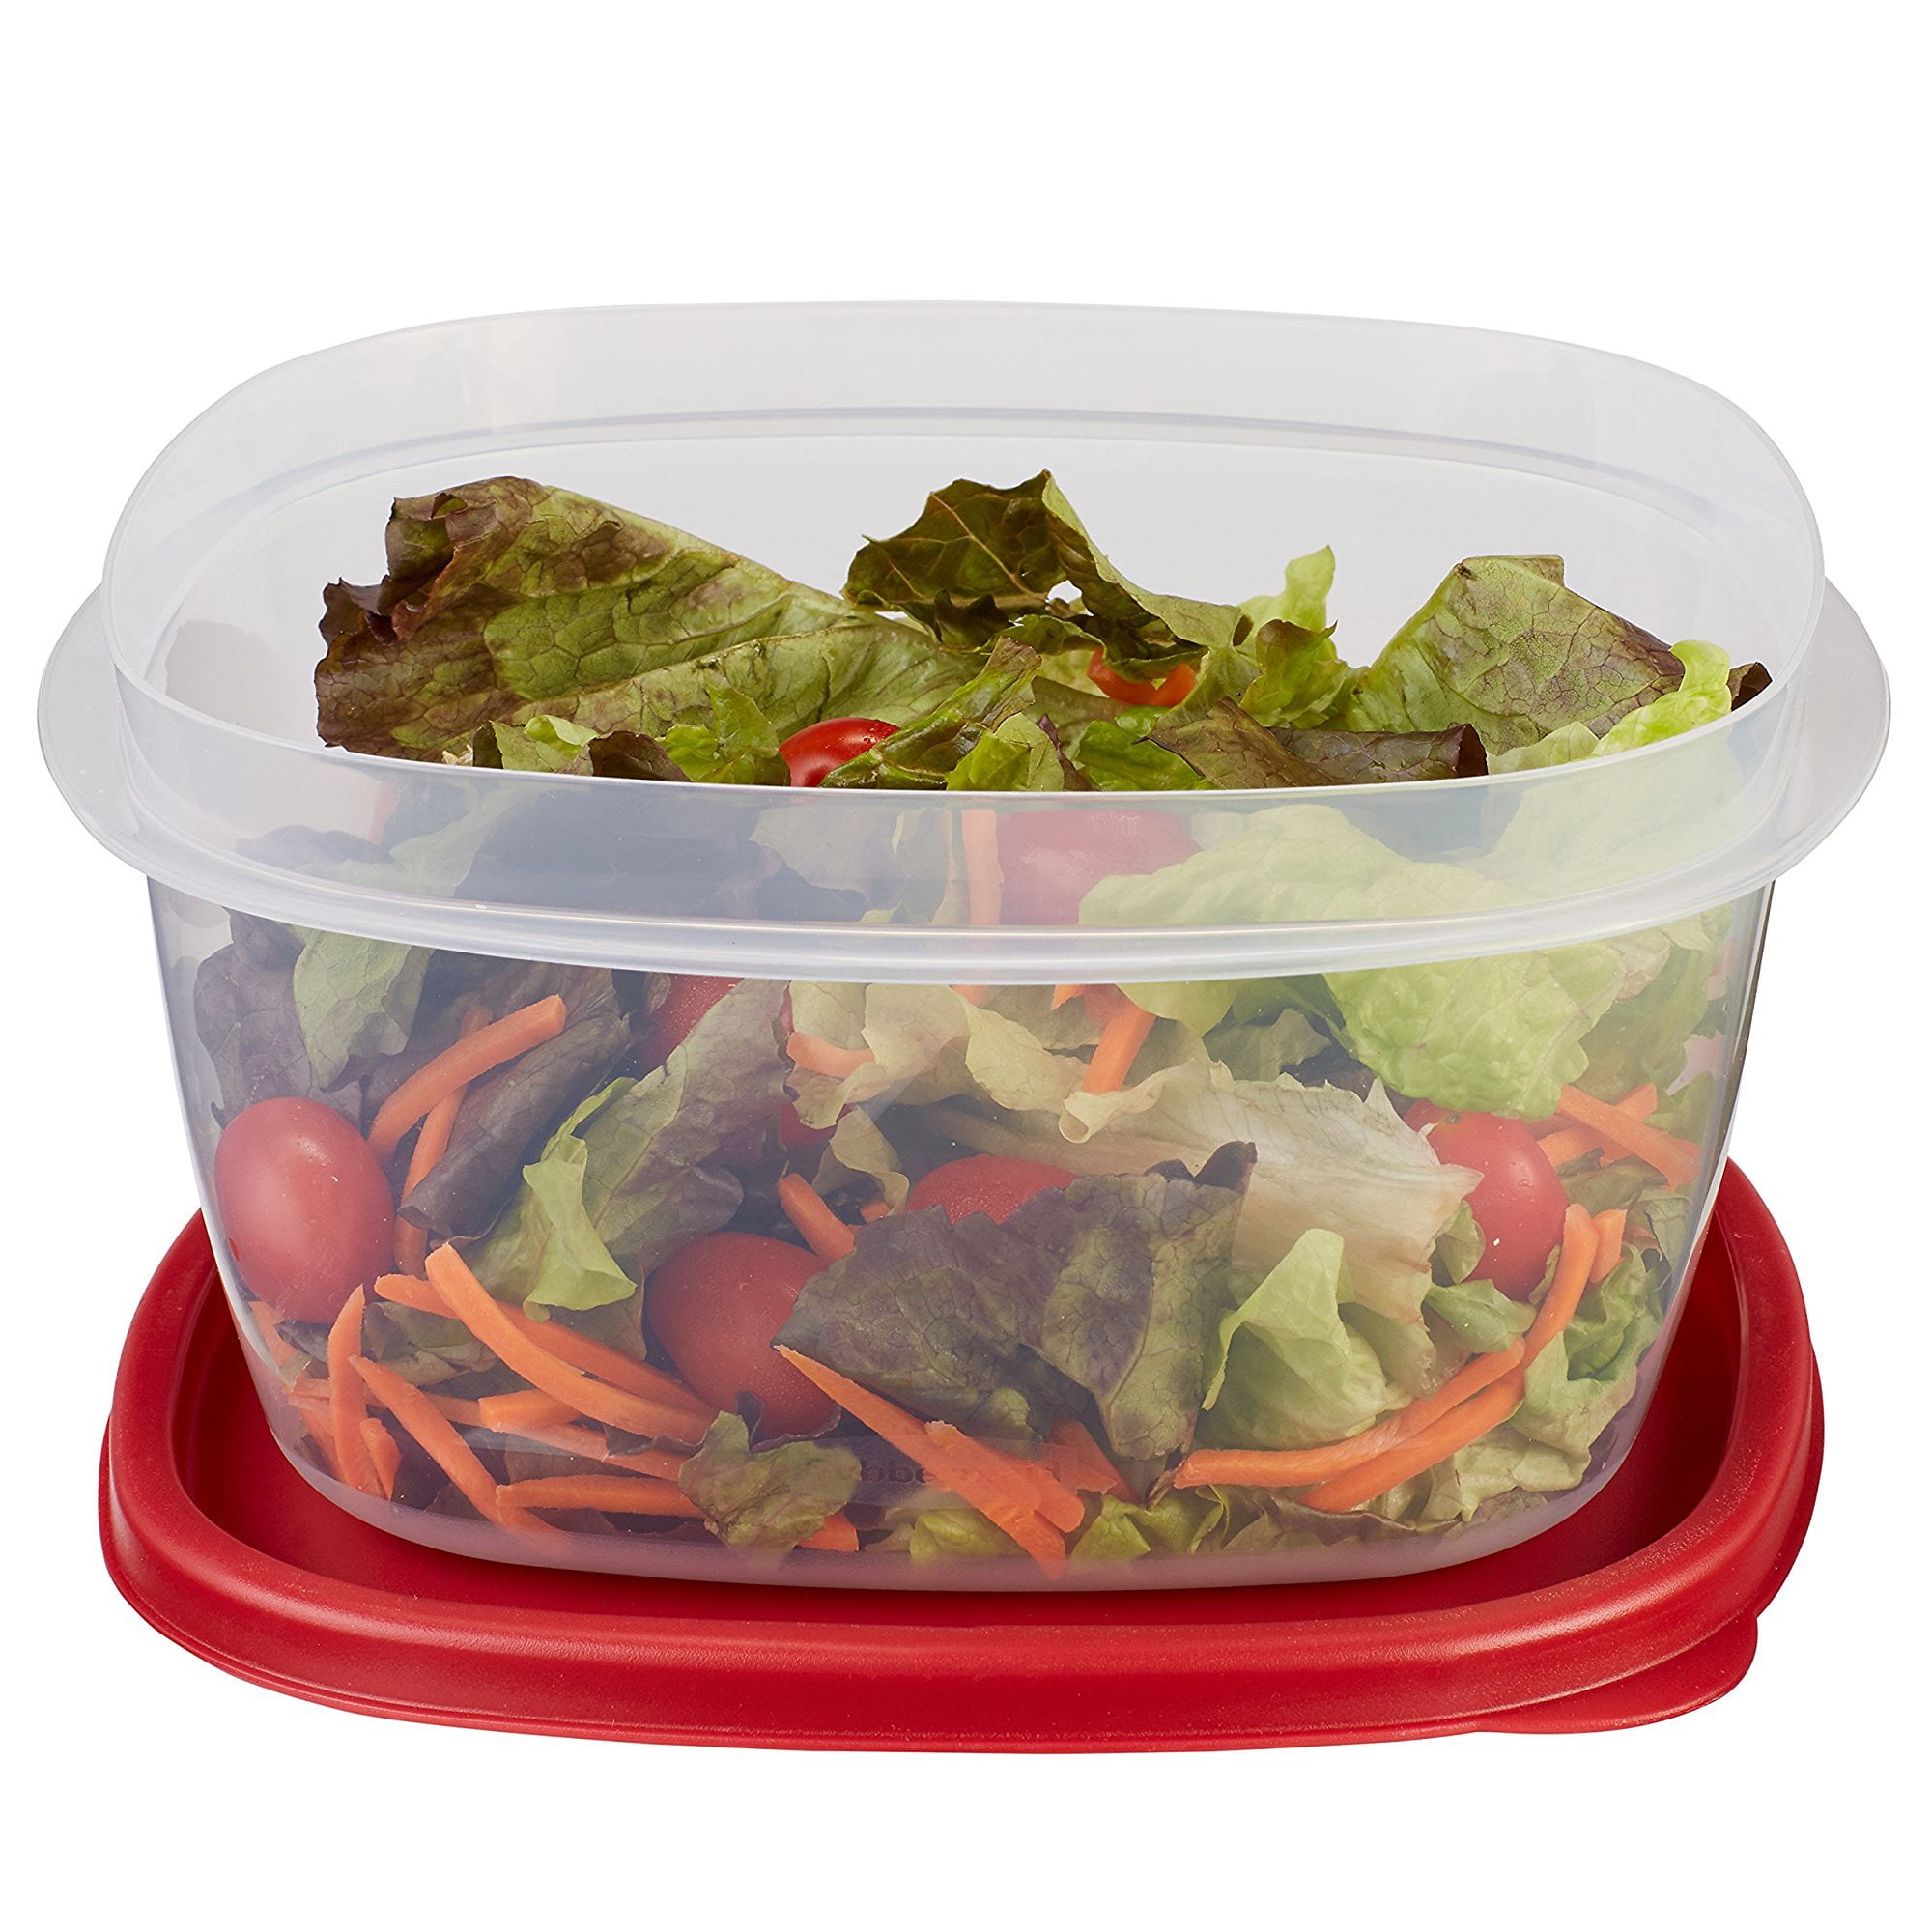 Rubbermaid 1937693 14 Cup Clear Square Premier Storage Container